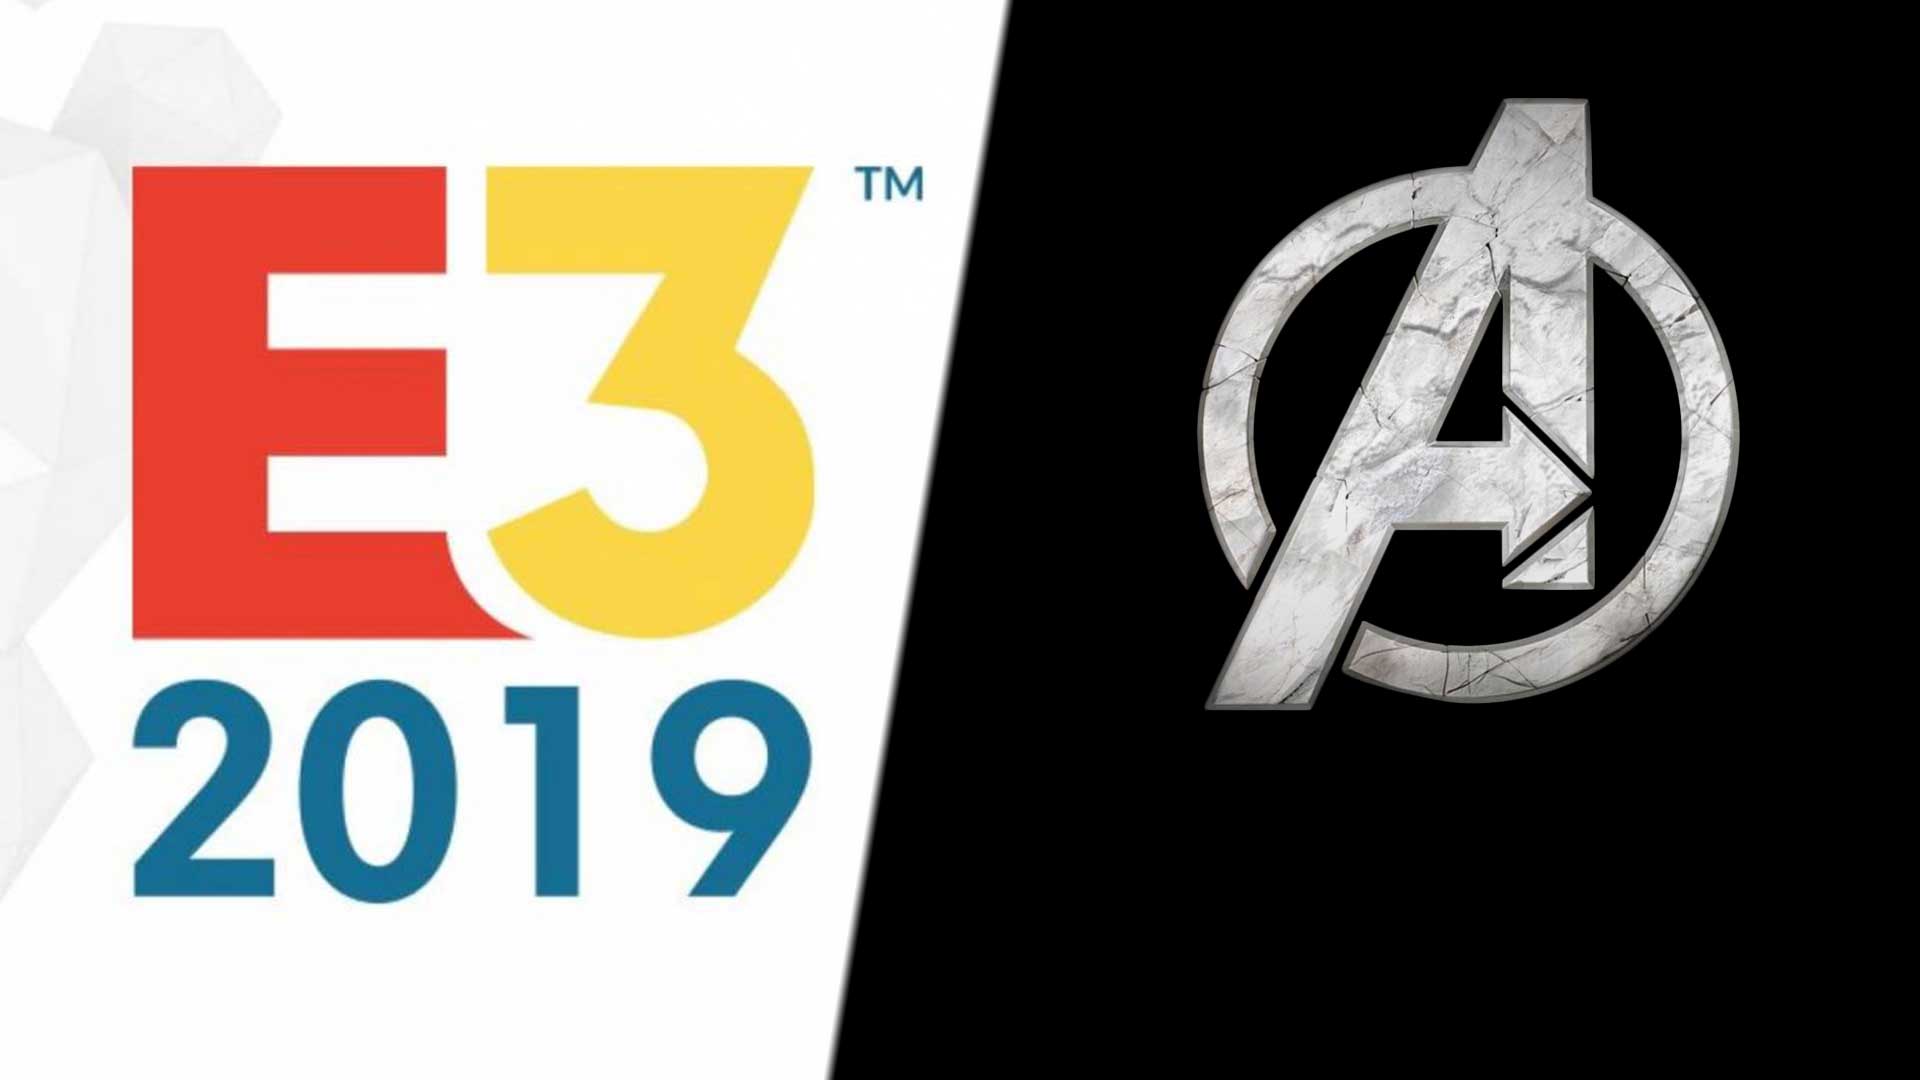 The Avengers Project First Coming At E3 2019?